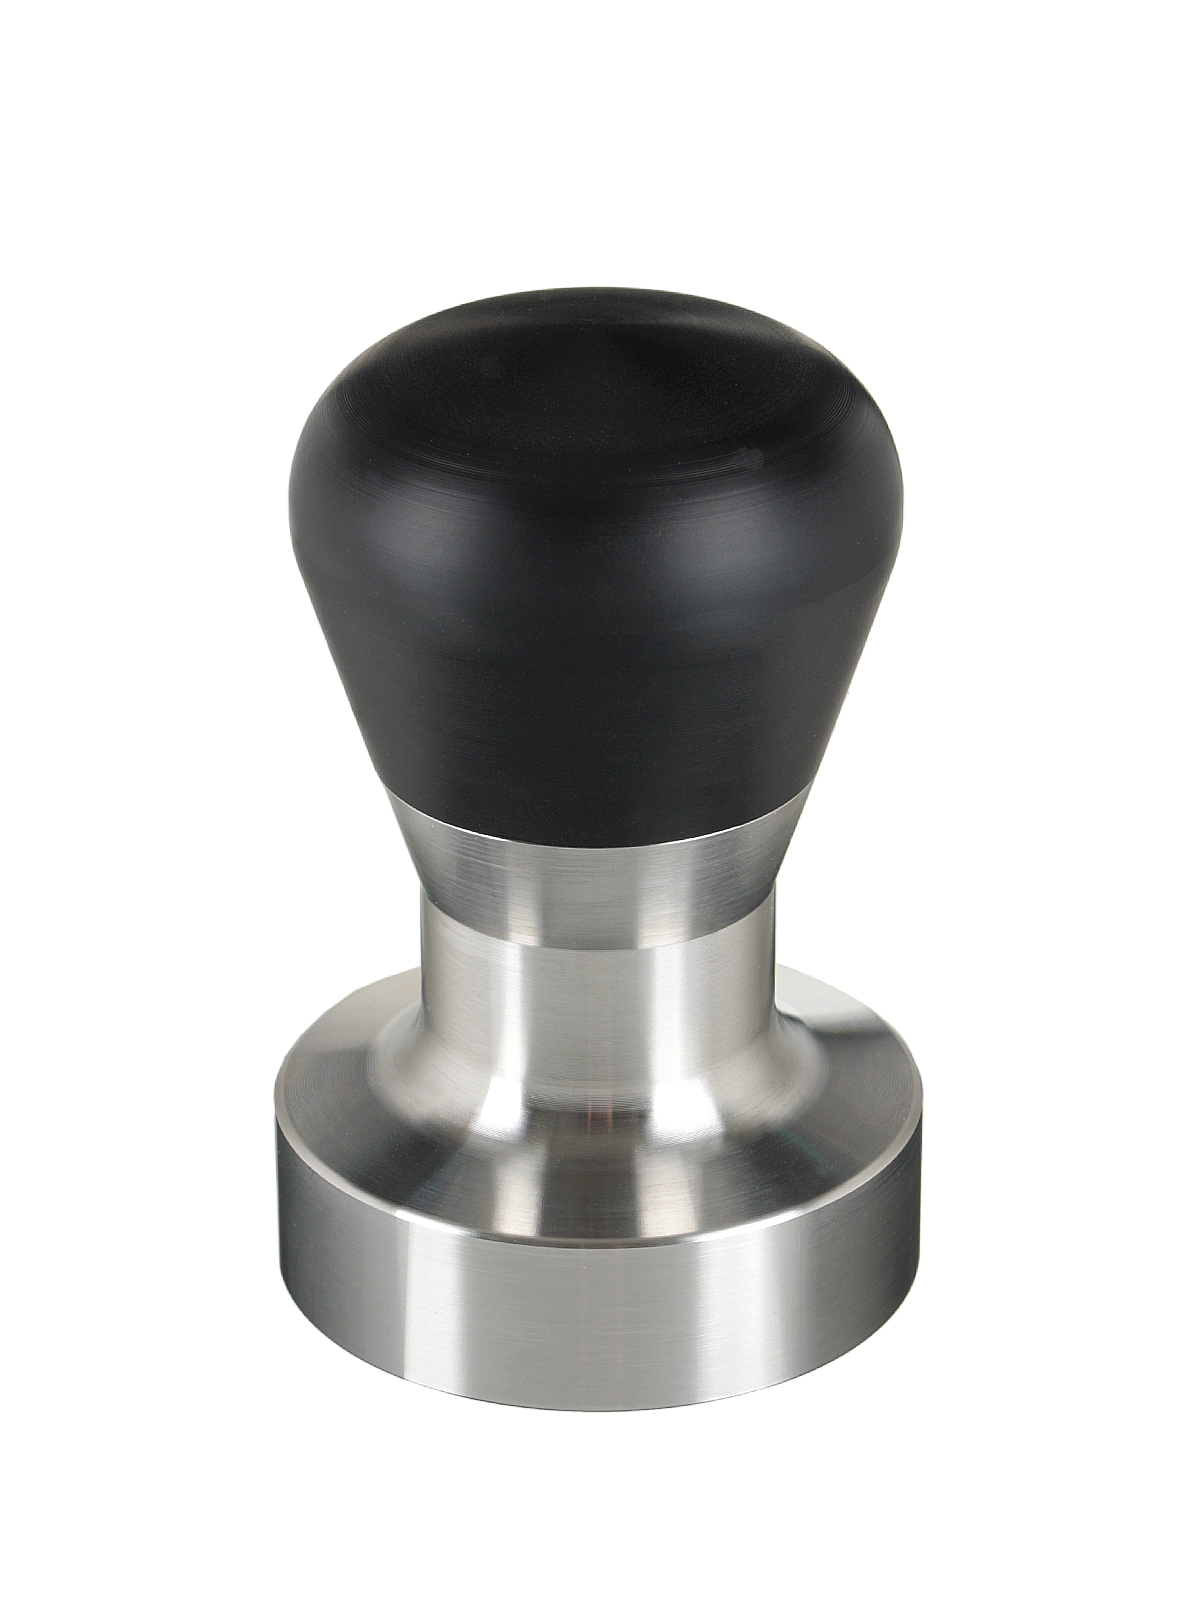 Scarlet Espresso Passion Tamper for Barista; with Ergonomic PVC or Precious Wood Handle of Choice and Precision Stainless Steel Base 41 mm 